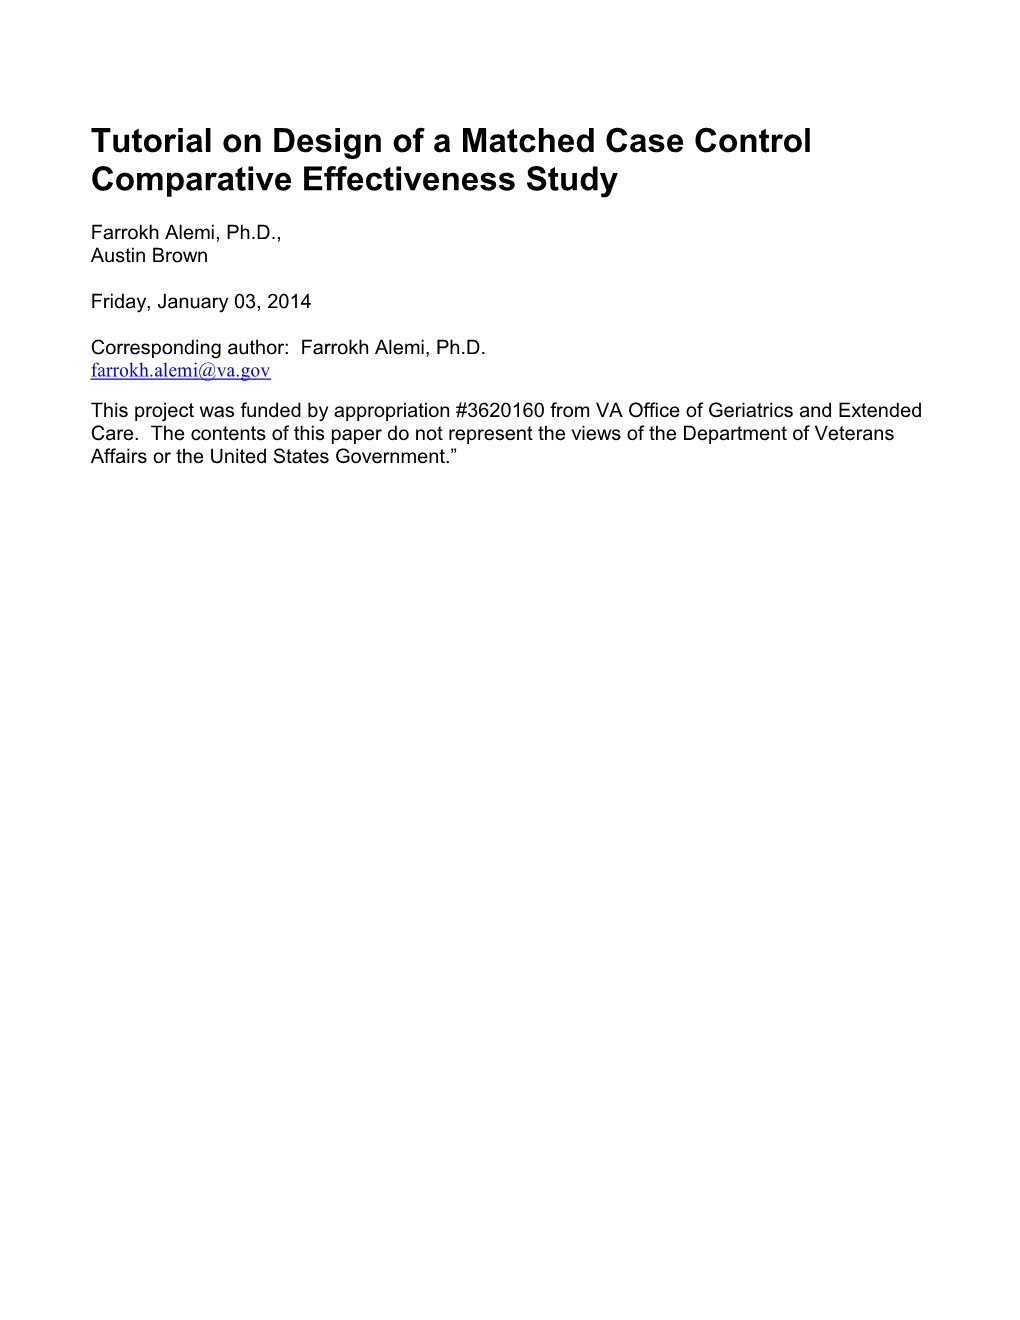 Tutorial on Design of a Matched Case Control Comparative Effectiveness Study